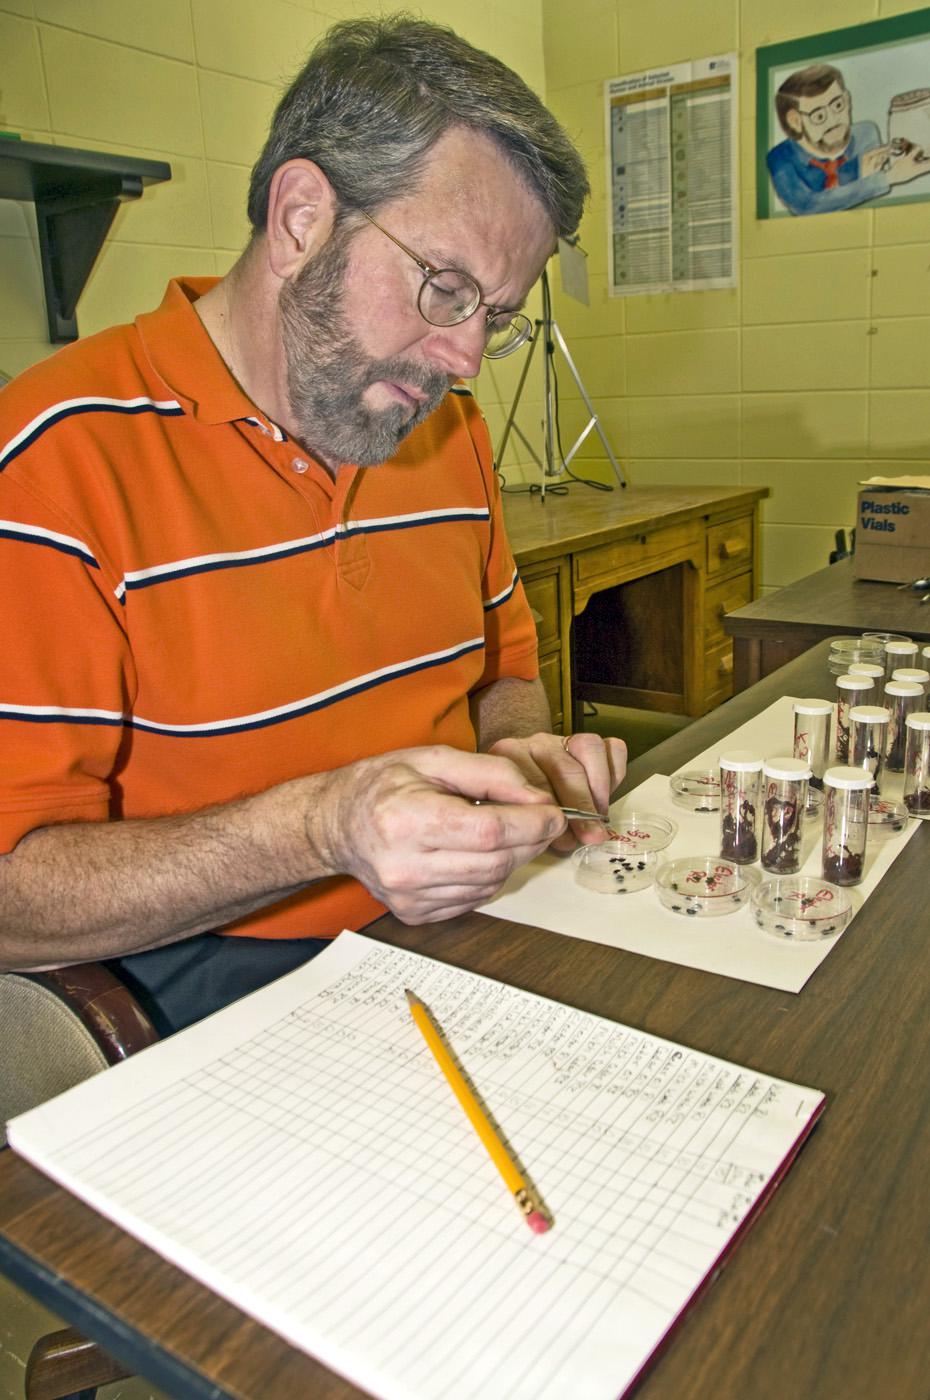 Dr. Jerome Goddard, a medical and veterinary entomologist with the Mississippi State University Extension Service, examines an insect specimen in his laboratory on campus. Goddard hopes to use his experience as a public health entomologist for teaching, research and outreach. (Photo by Marco Nicovich)